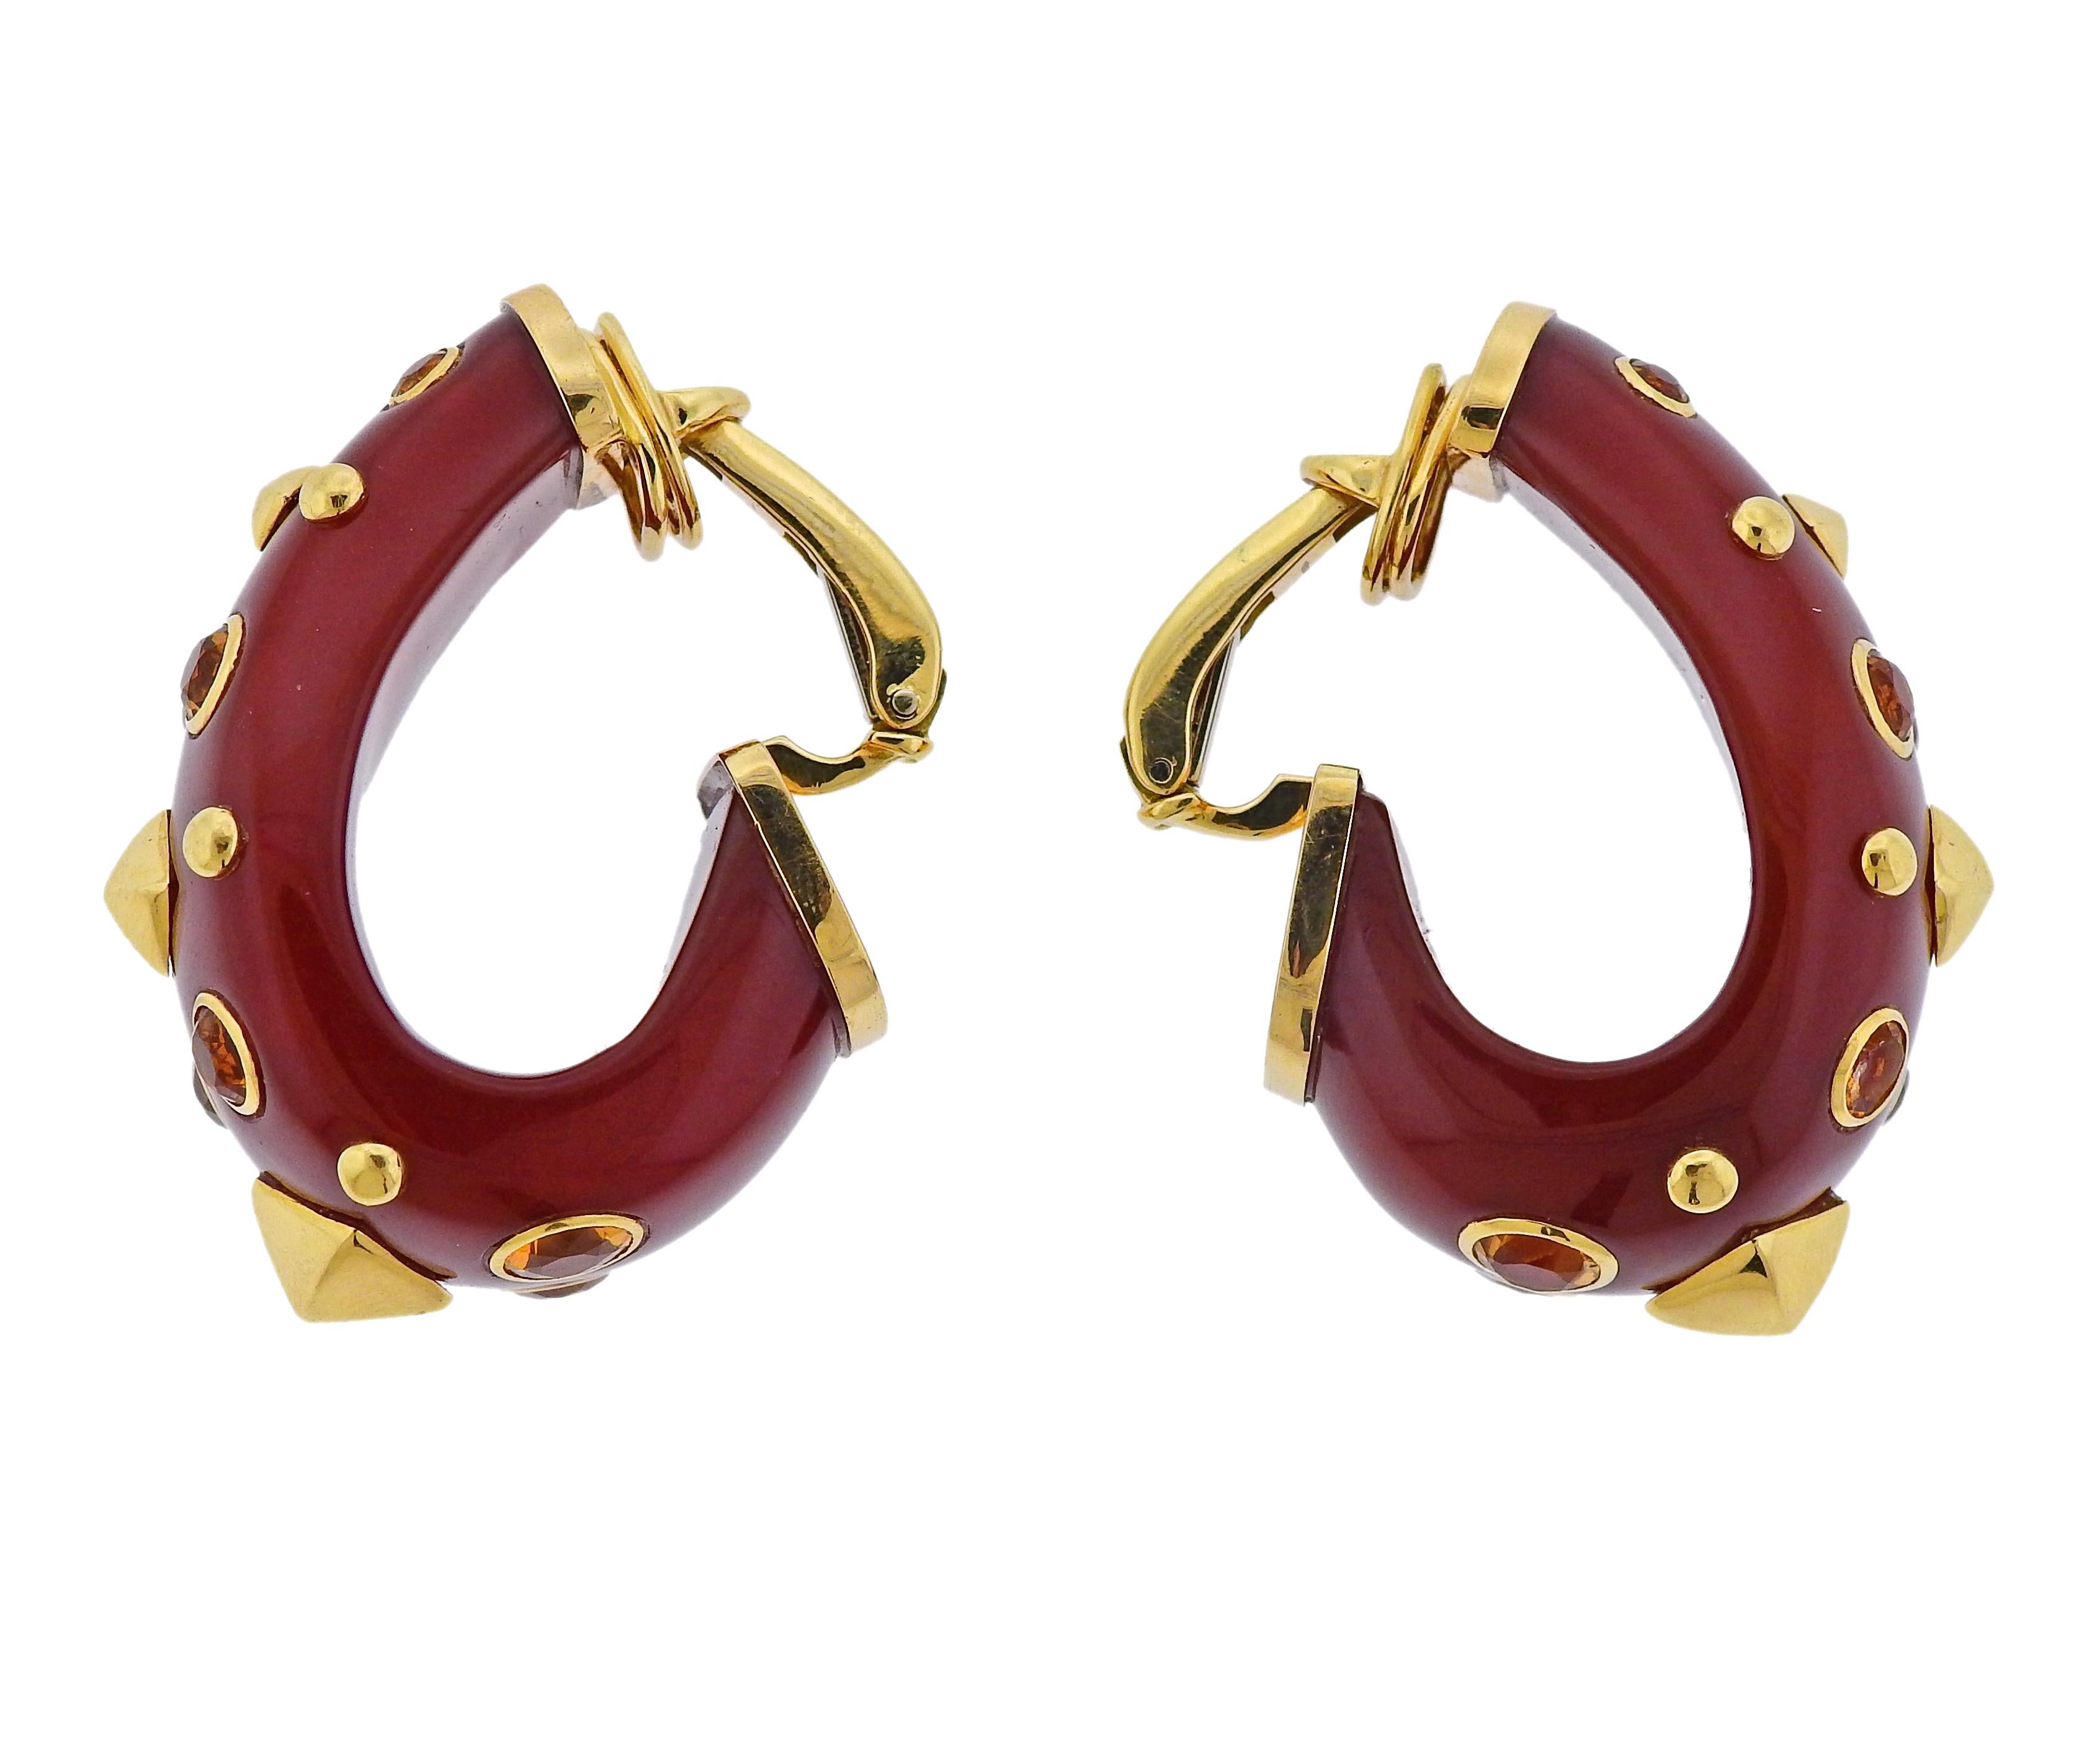 18k yellow gold large half hoop earrings by Trianon, featuring carnelian top and citrines. Retail $16500. Earrings are 37mm x 19mm, weigh 44.6 grams. Marked:  Trianon mark, BV125X, 750, Trianon.